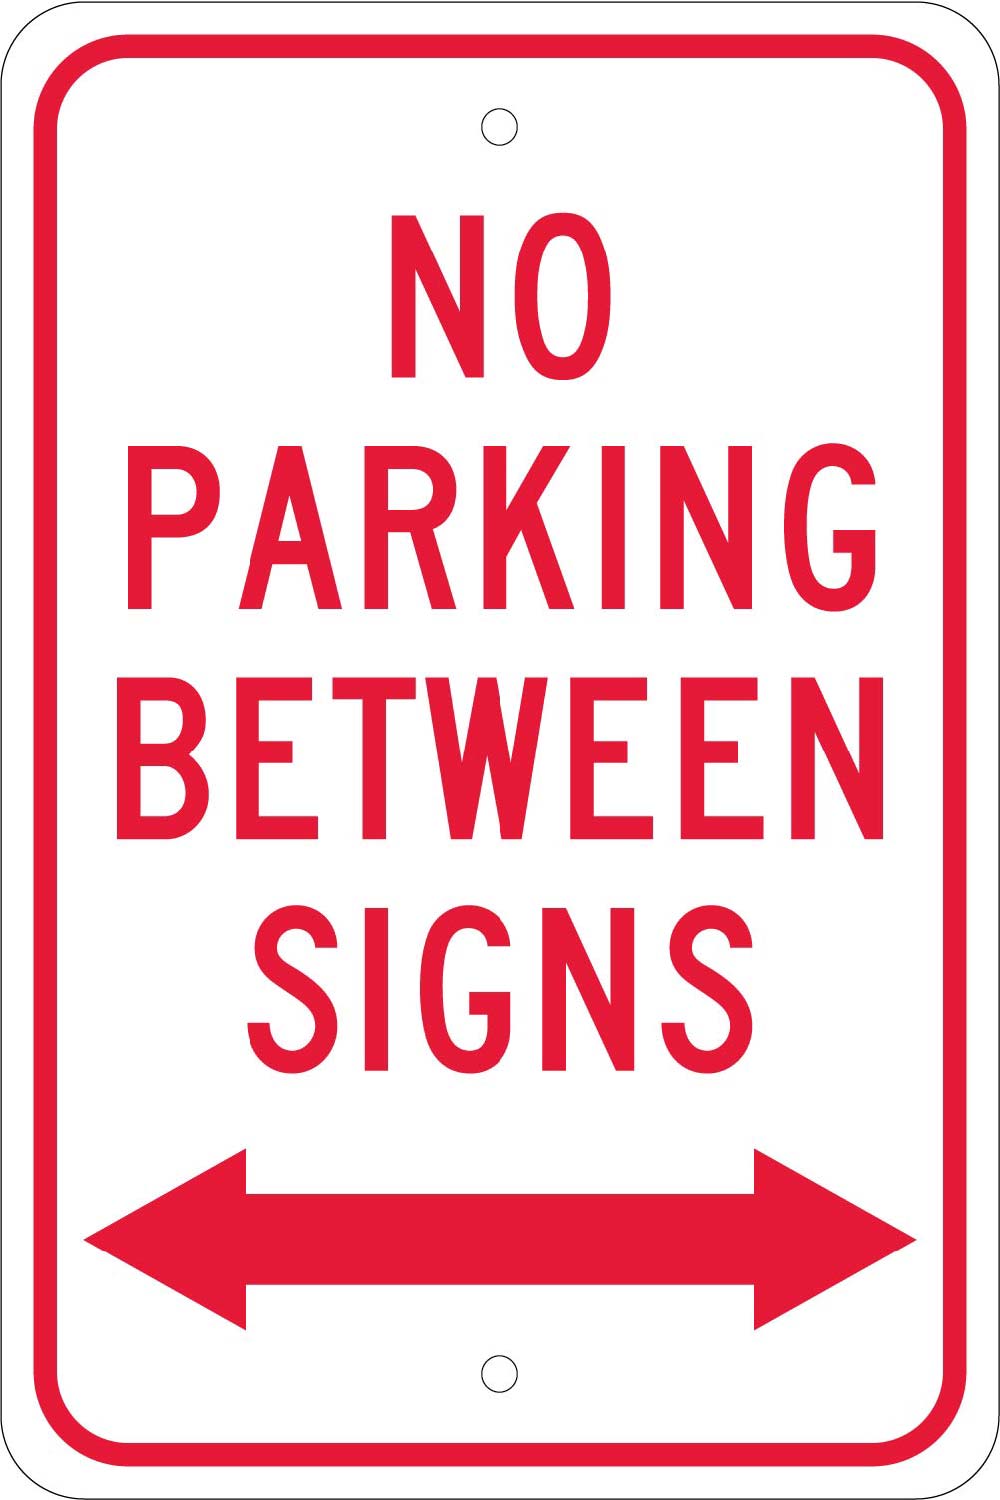 No Parking Between Signs Sign-eSafety Supplies, Inc